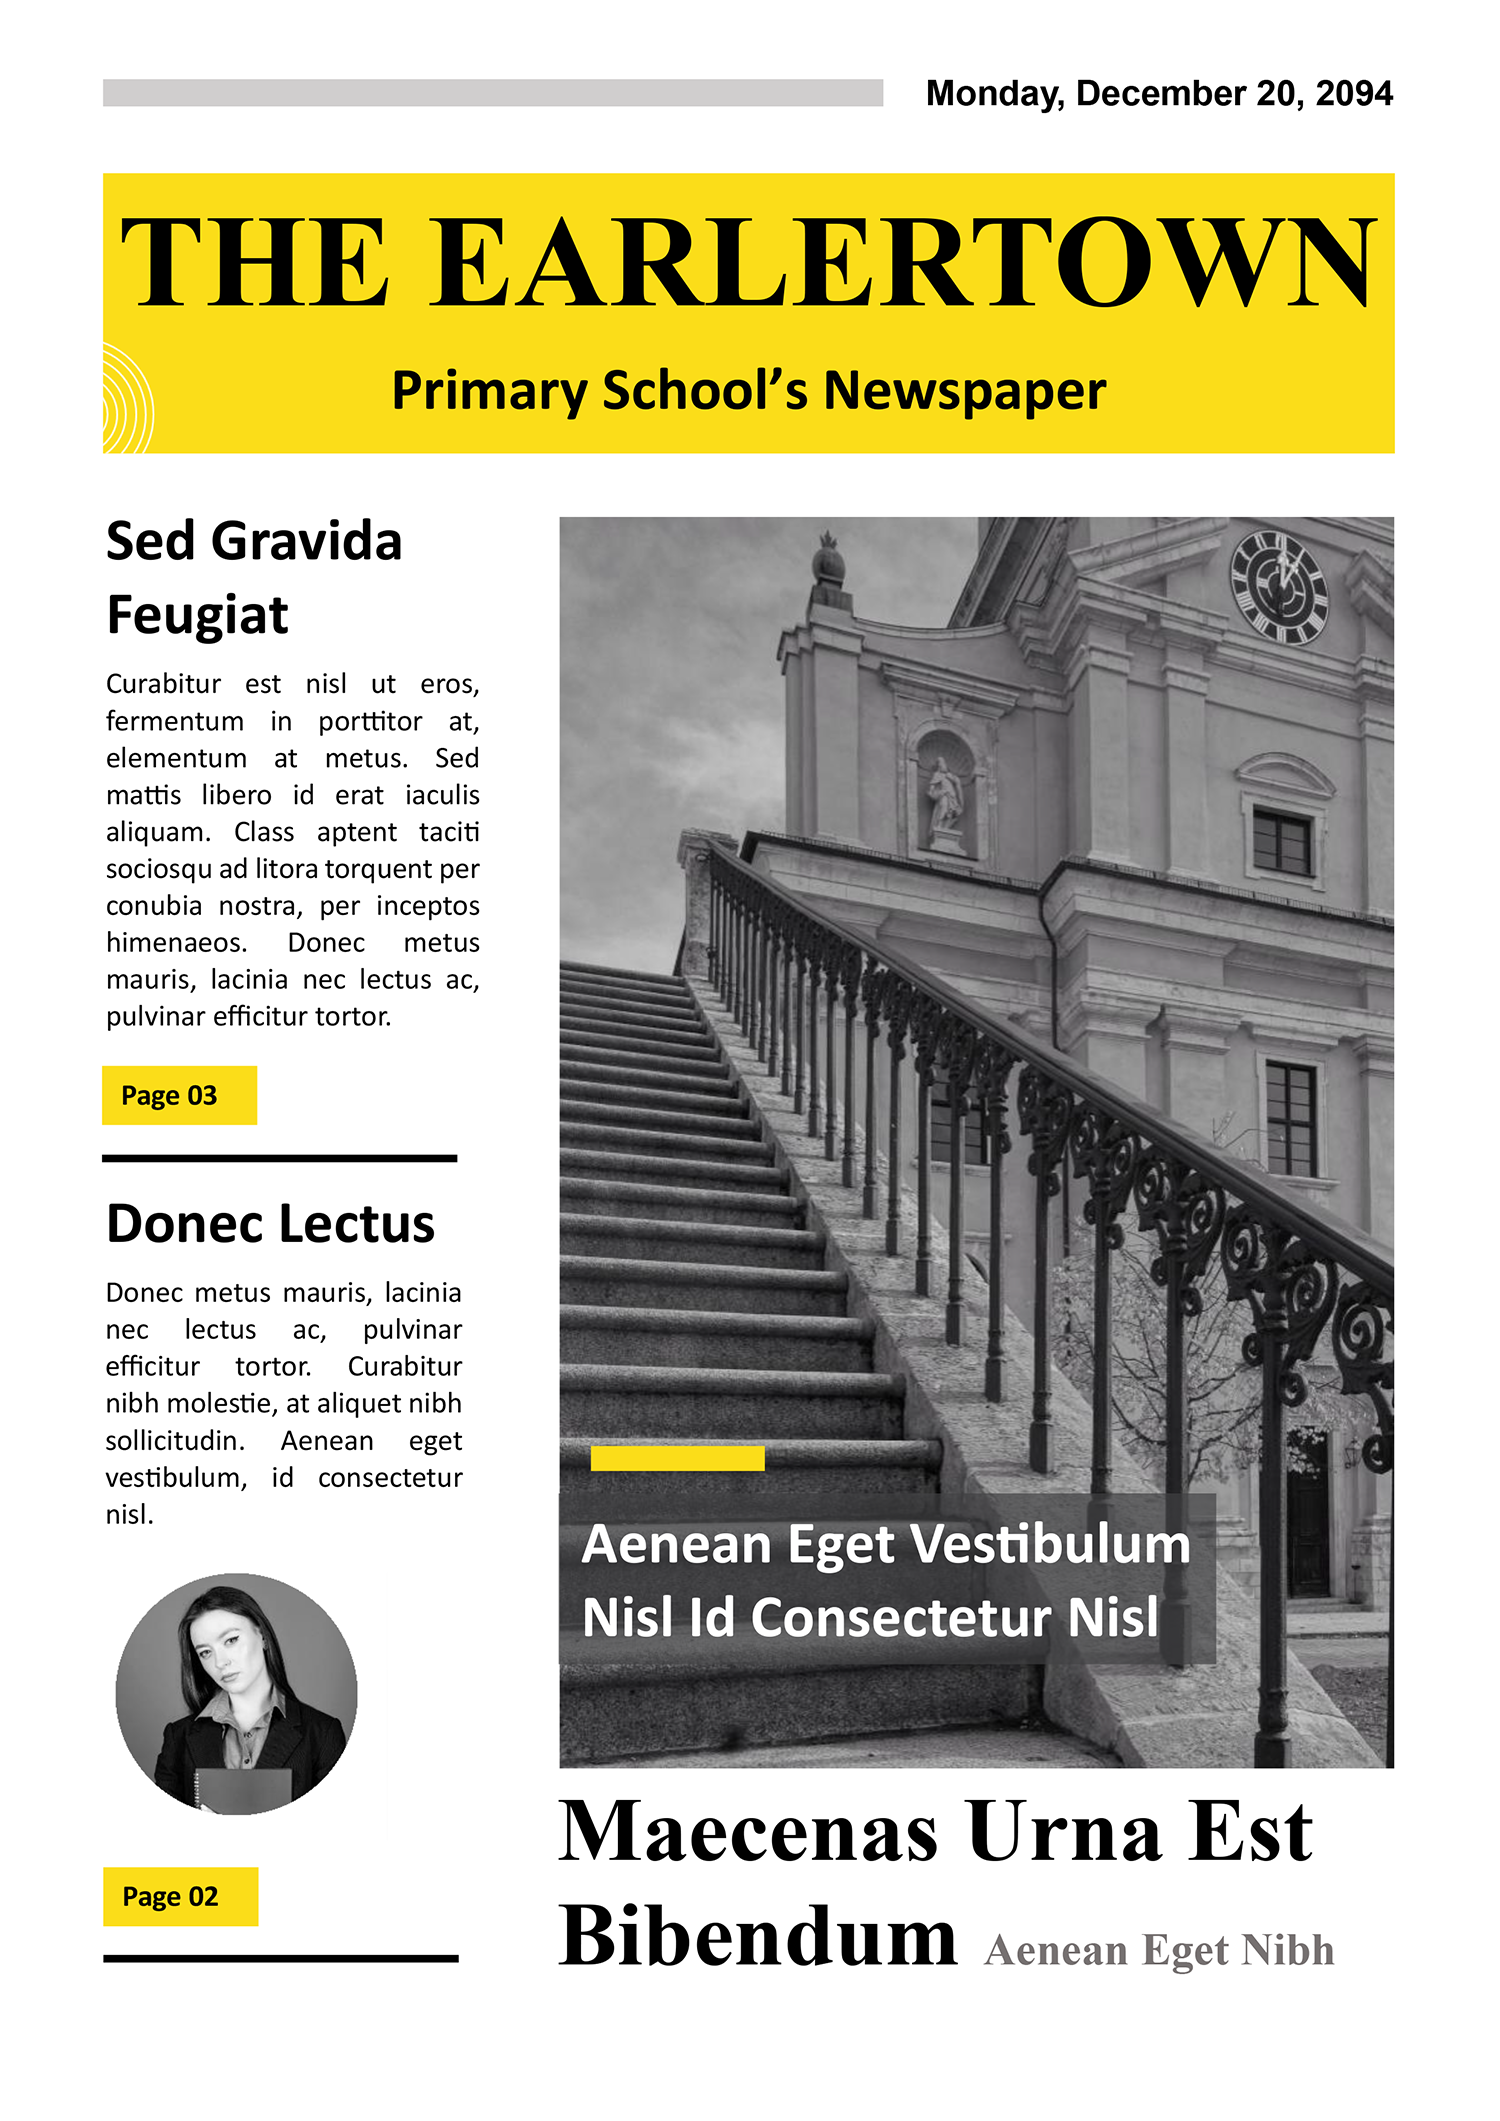 School Newspaper Article Template - Page 01